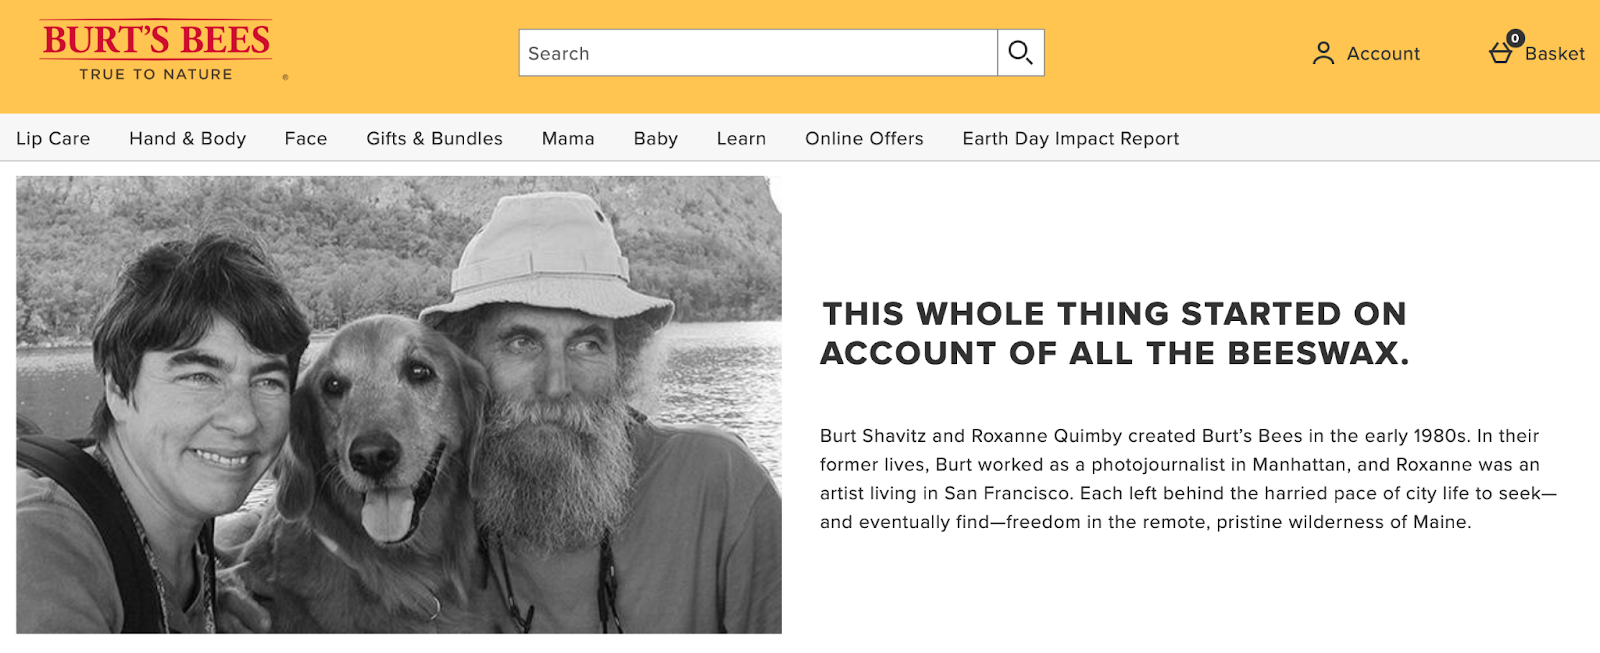 Screenshot of Burt's Bees brand story, "This Whole Thing Started on Account of All the Beeswax," which can help build trust with customers.